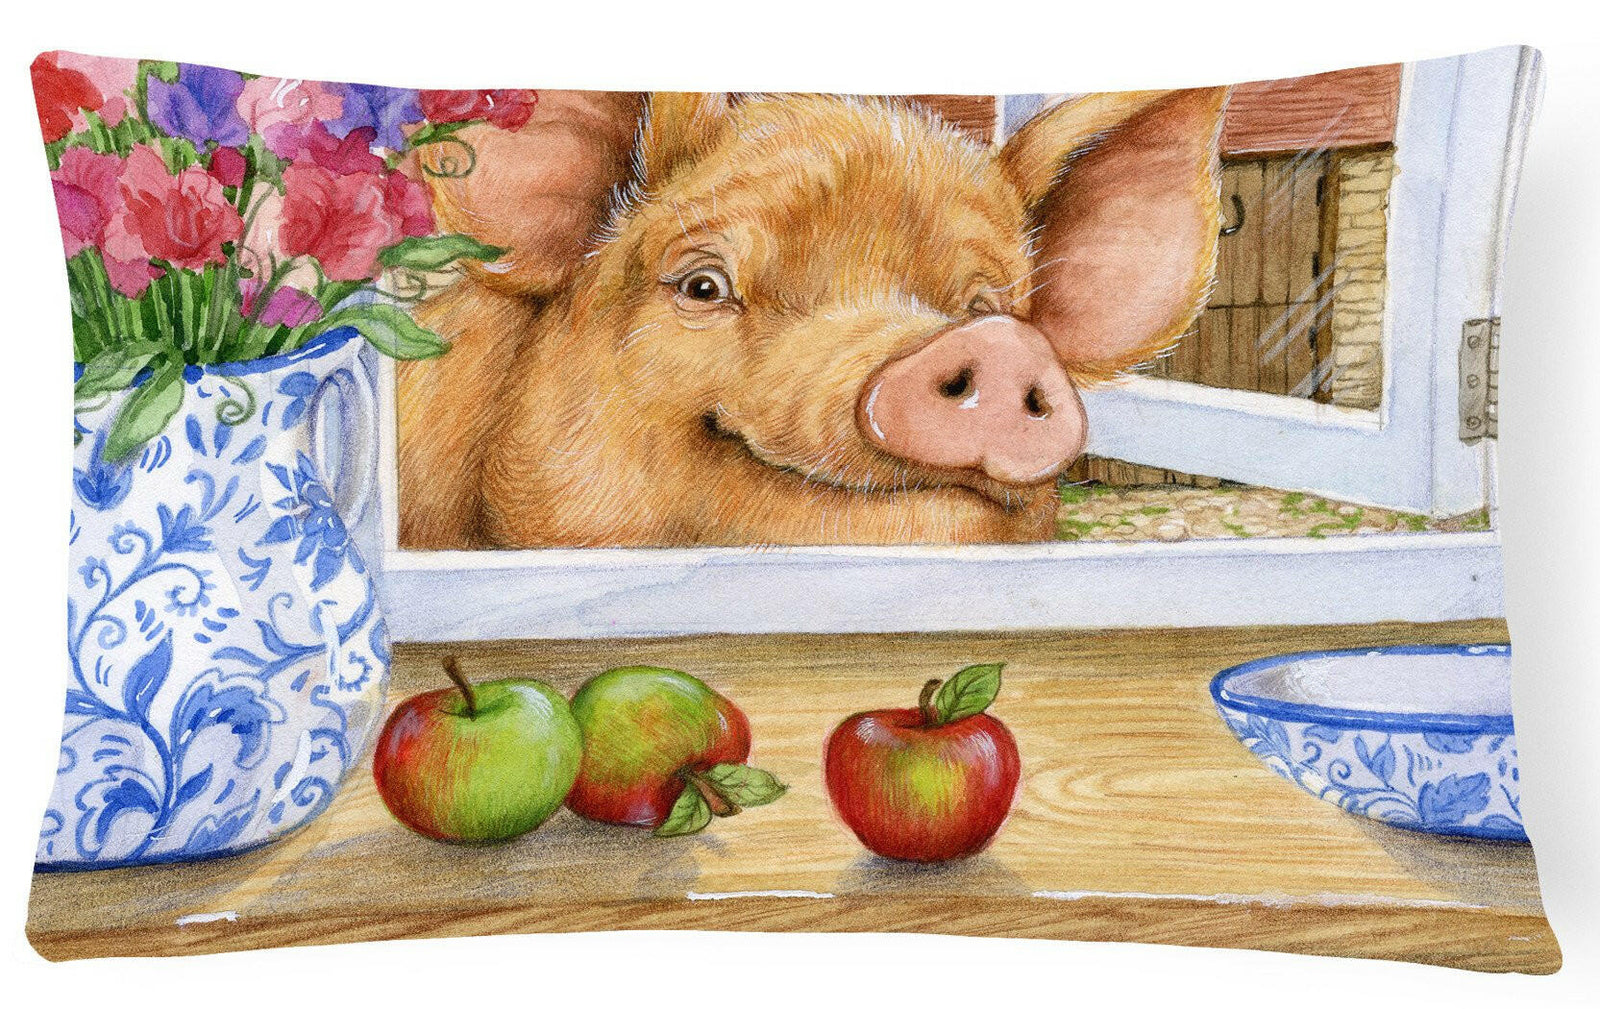 Pig trying to reach the Apple in the Window Fabric Decorative Pillow CDCO0352PW1216 by Caroline's Treasures